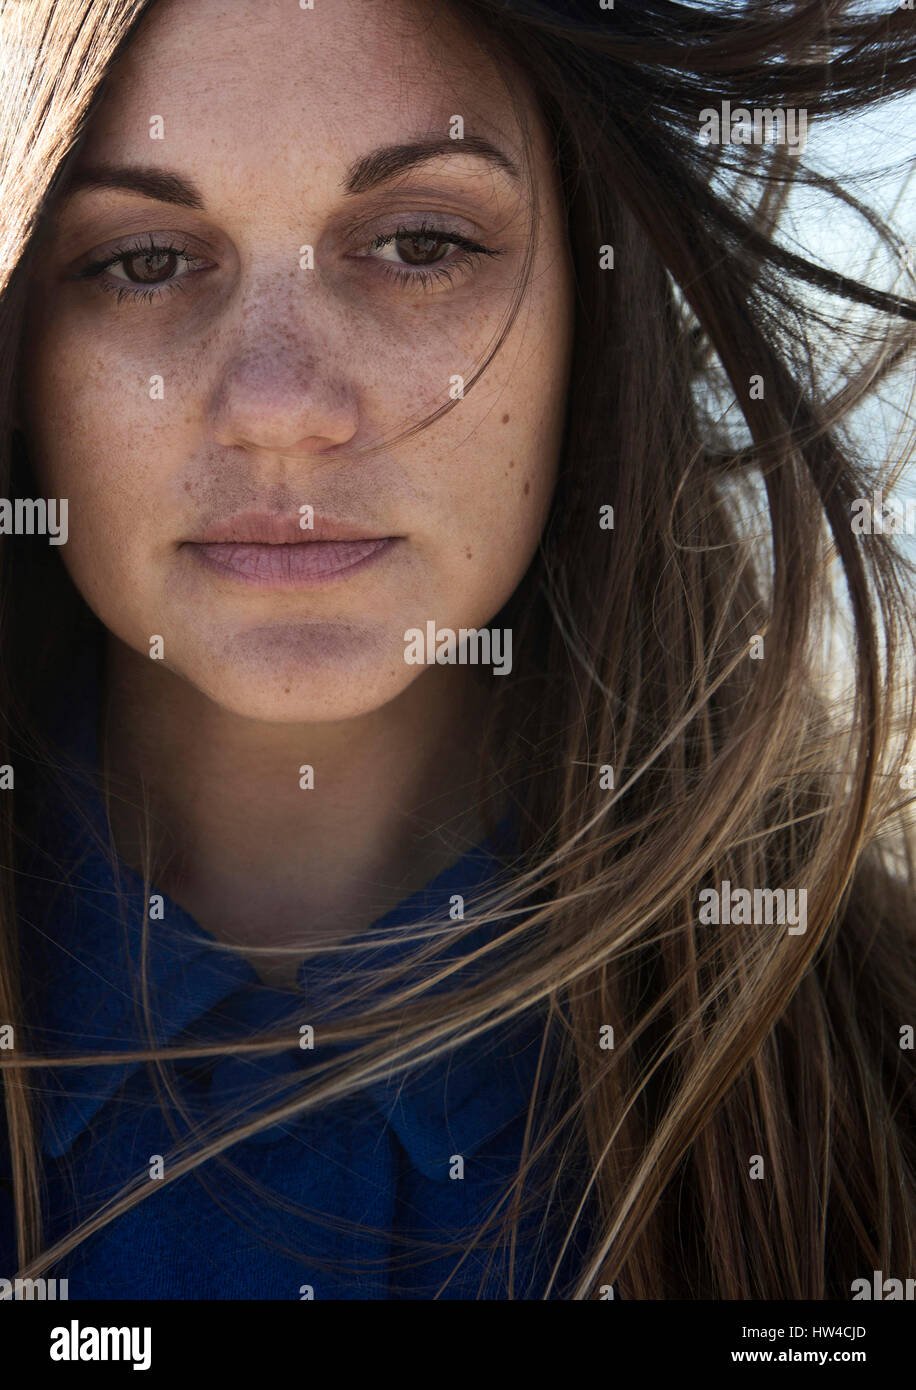 Wind blowing hair of Caucasian woman with freckles Stock Photo